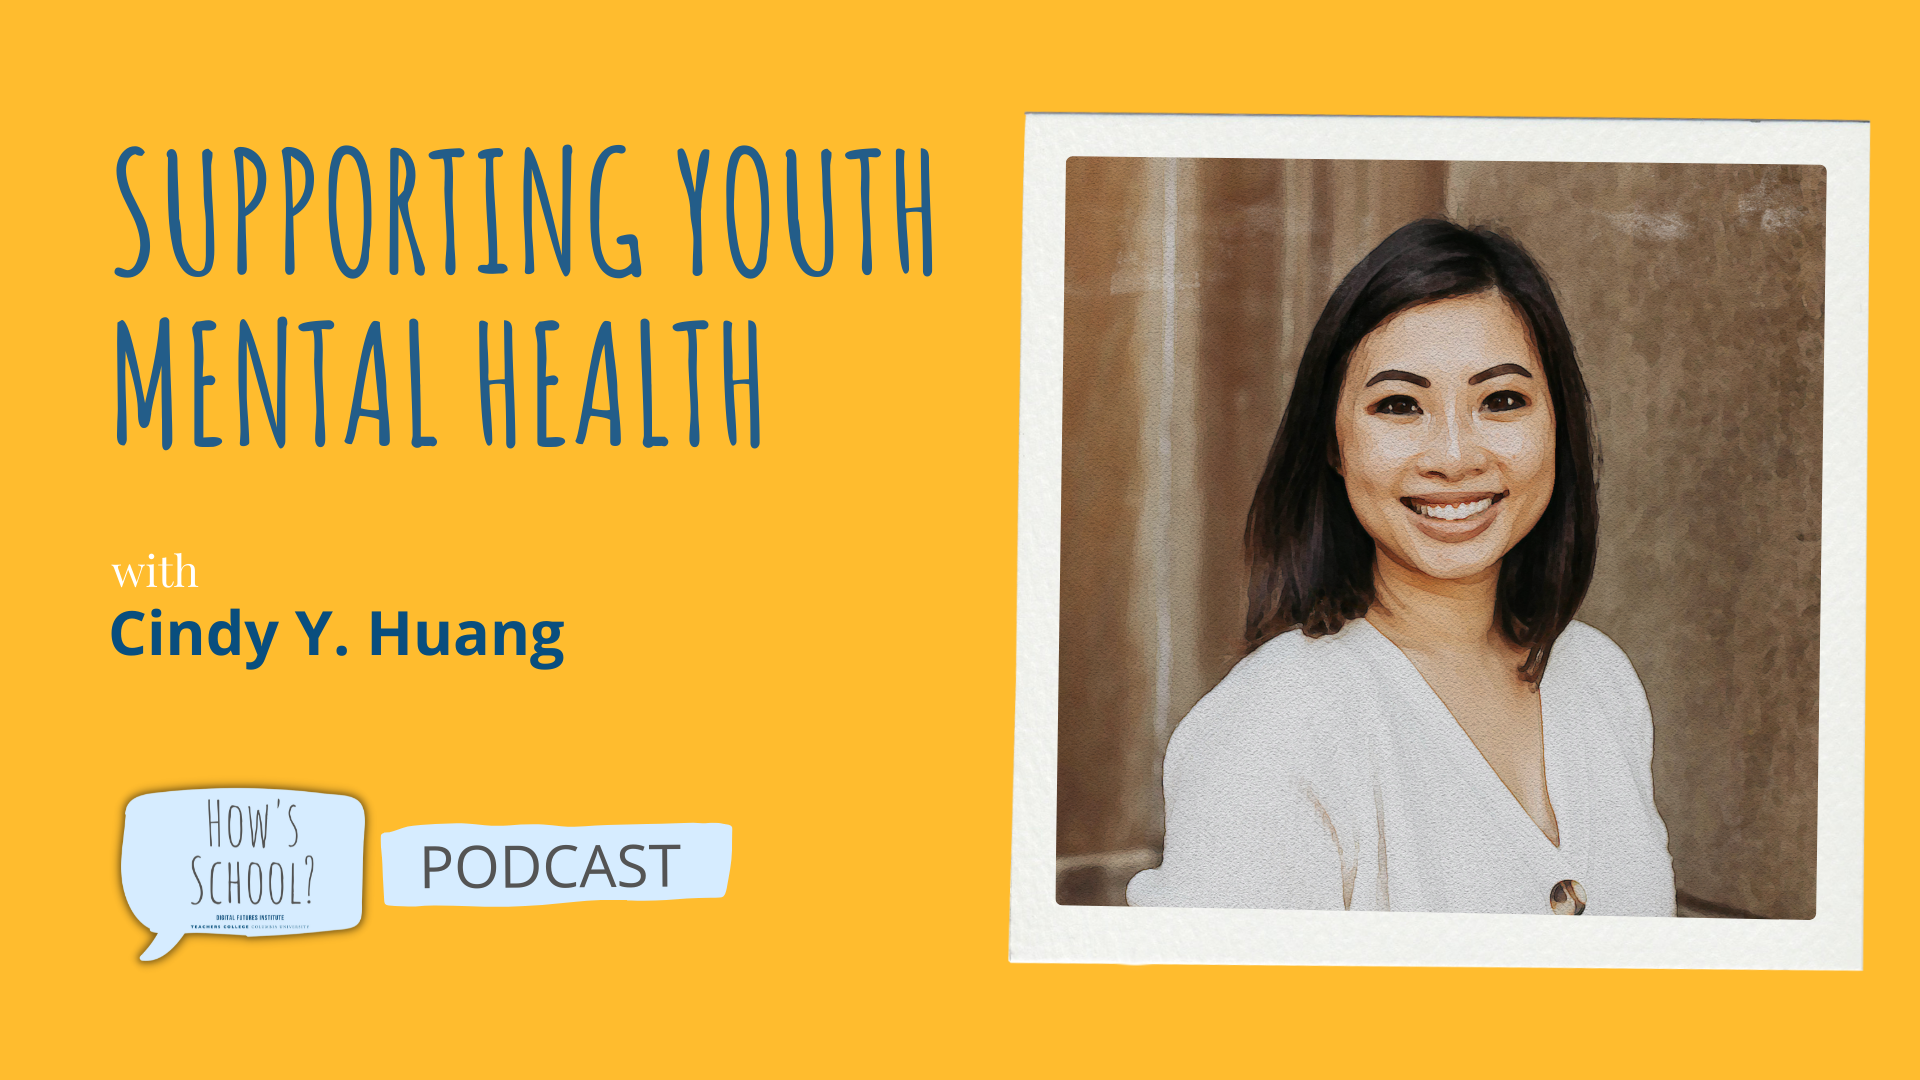 Supporting Youth Mental Health Image with Cindy Y. Huang on yellow background